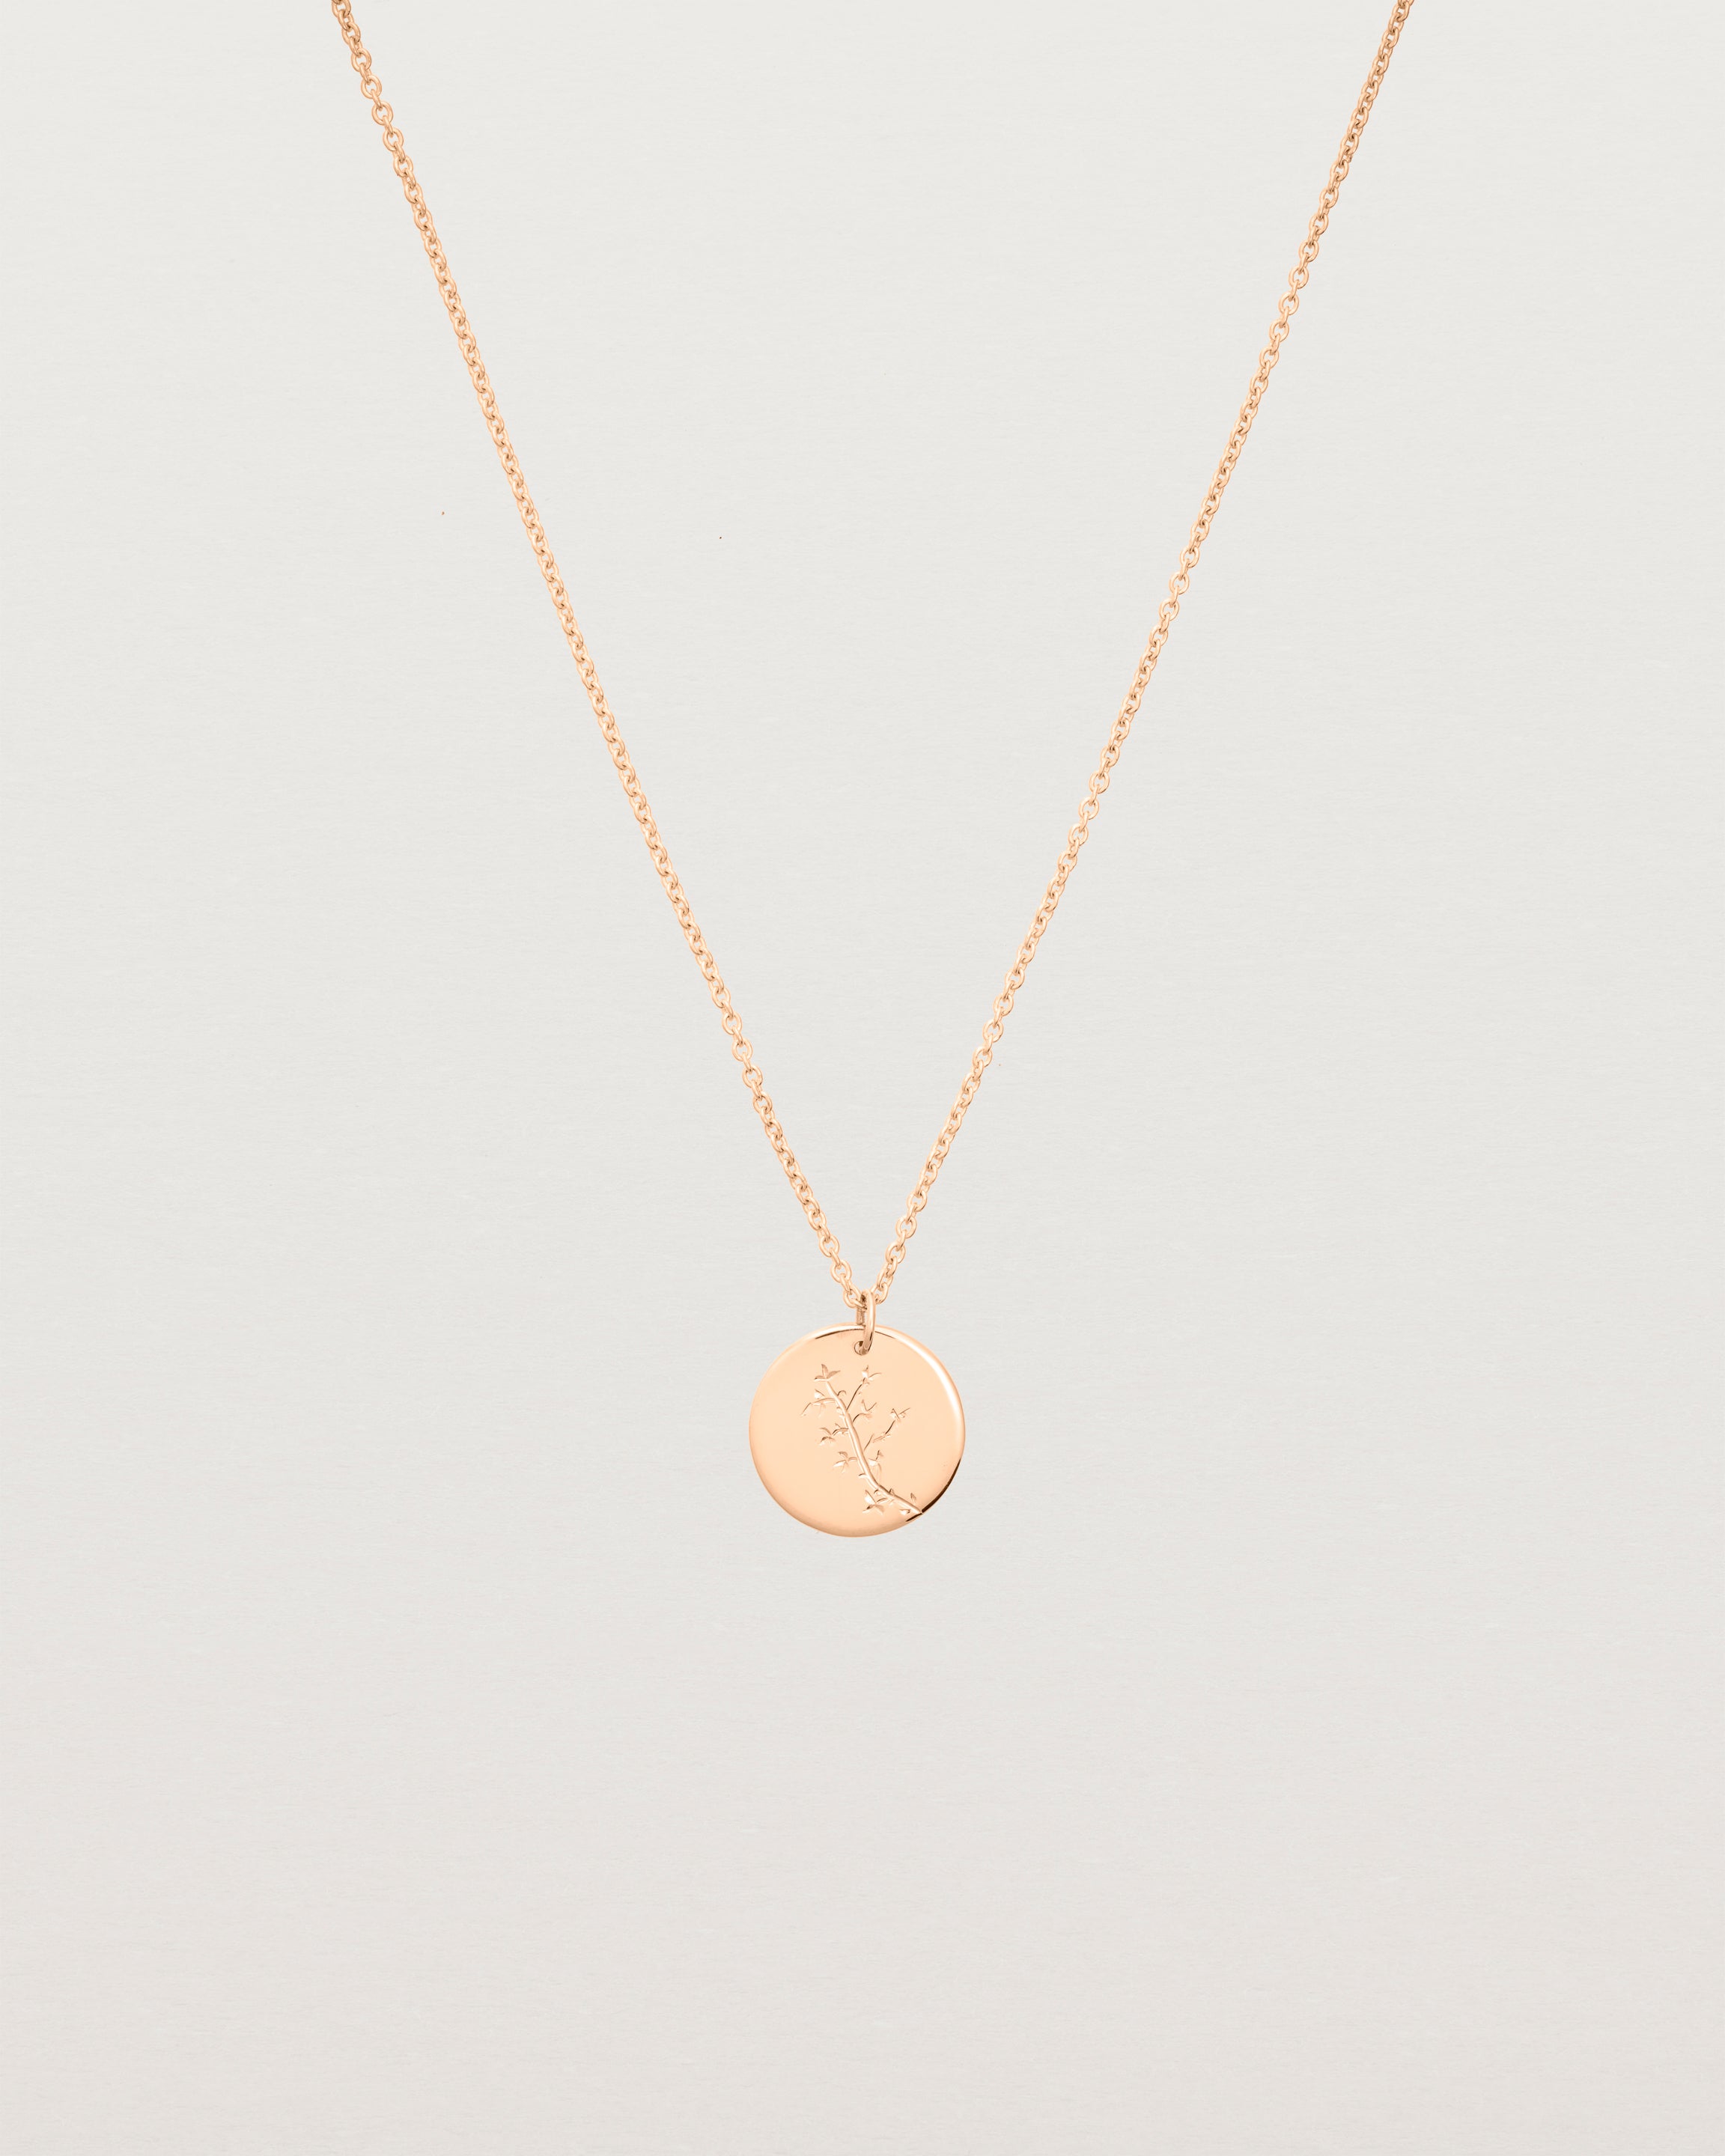 rose gold engraved necklace with a botanical vine engraving